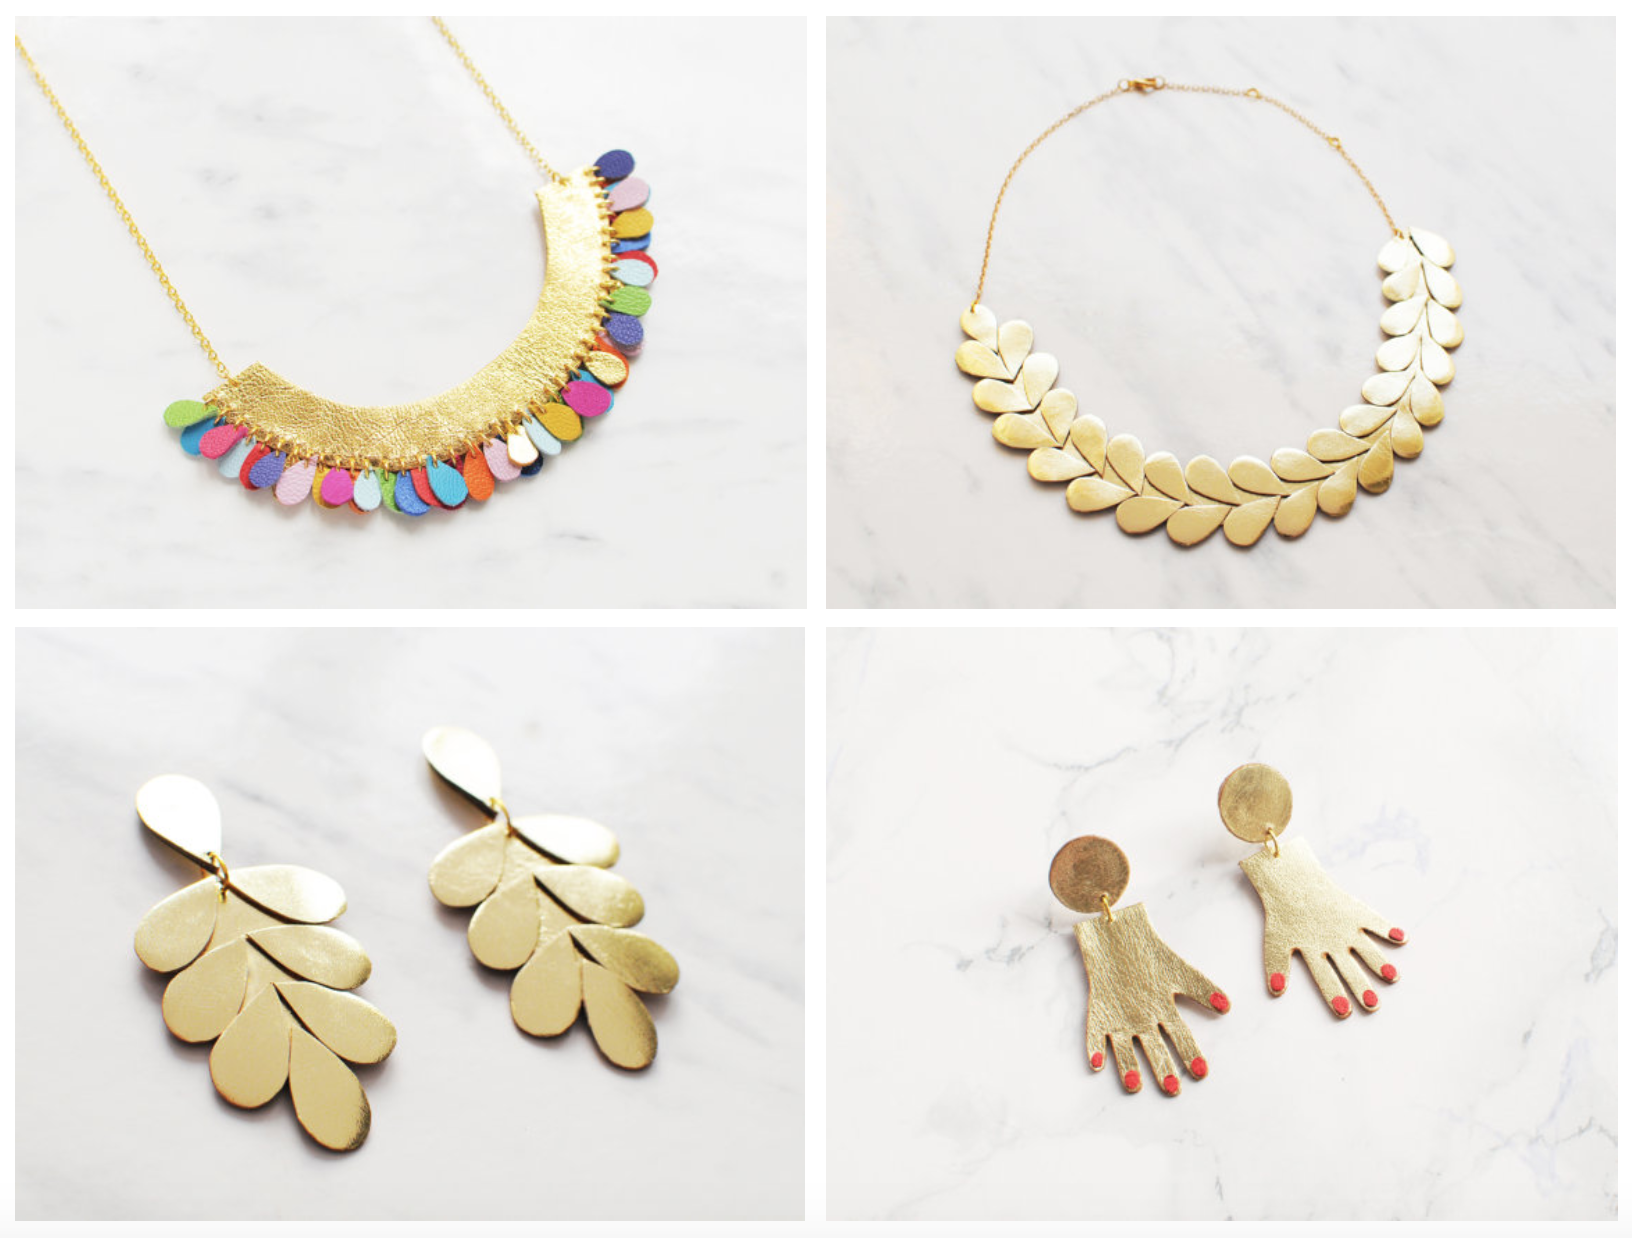 Benu Made gold leather jewelry on Etsy